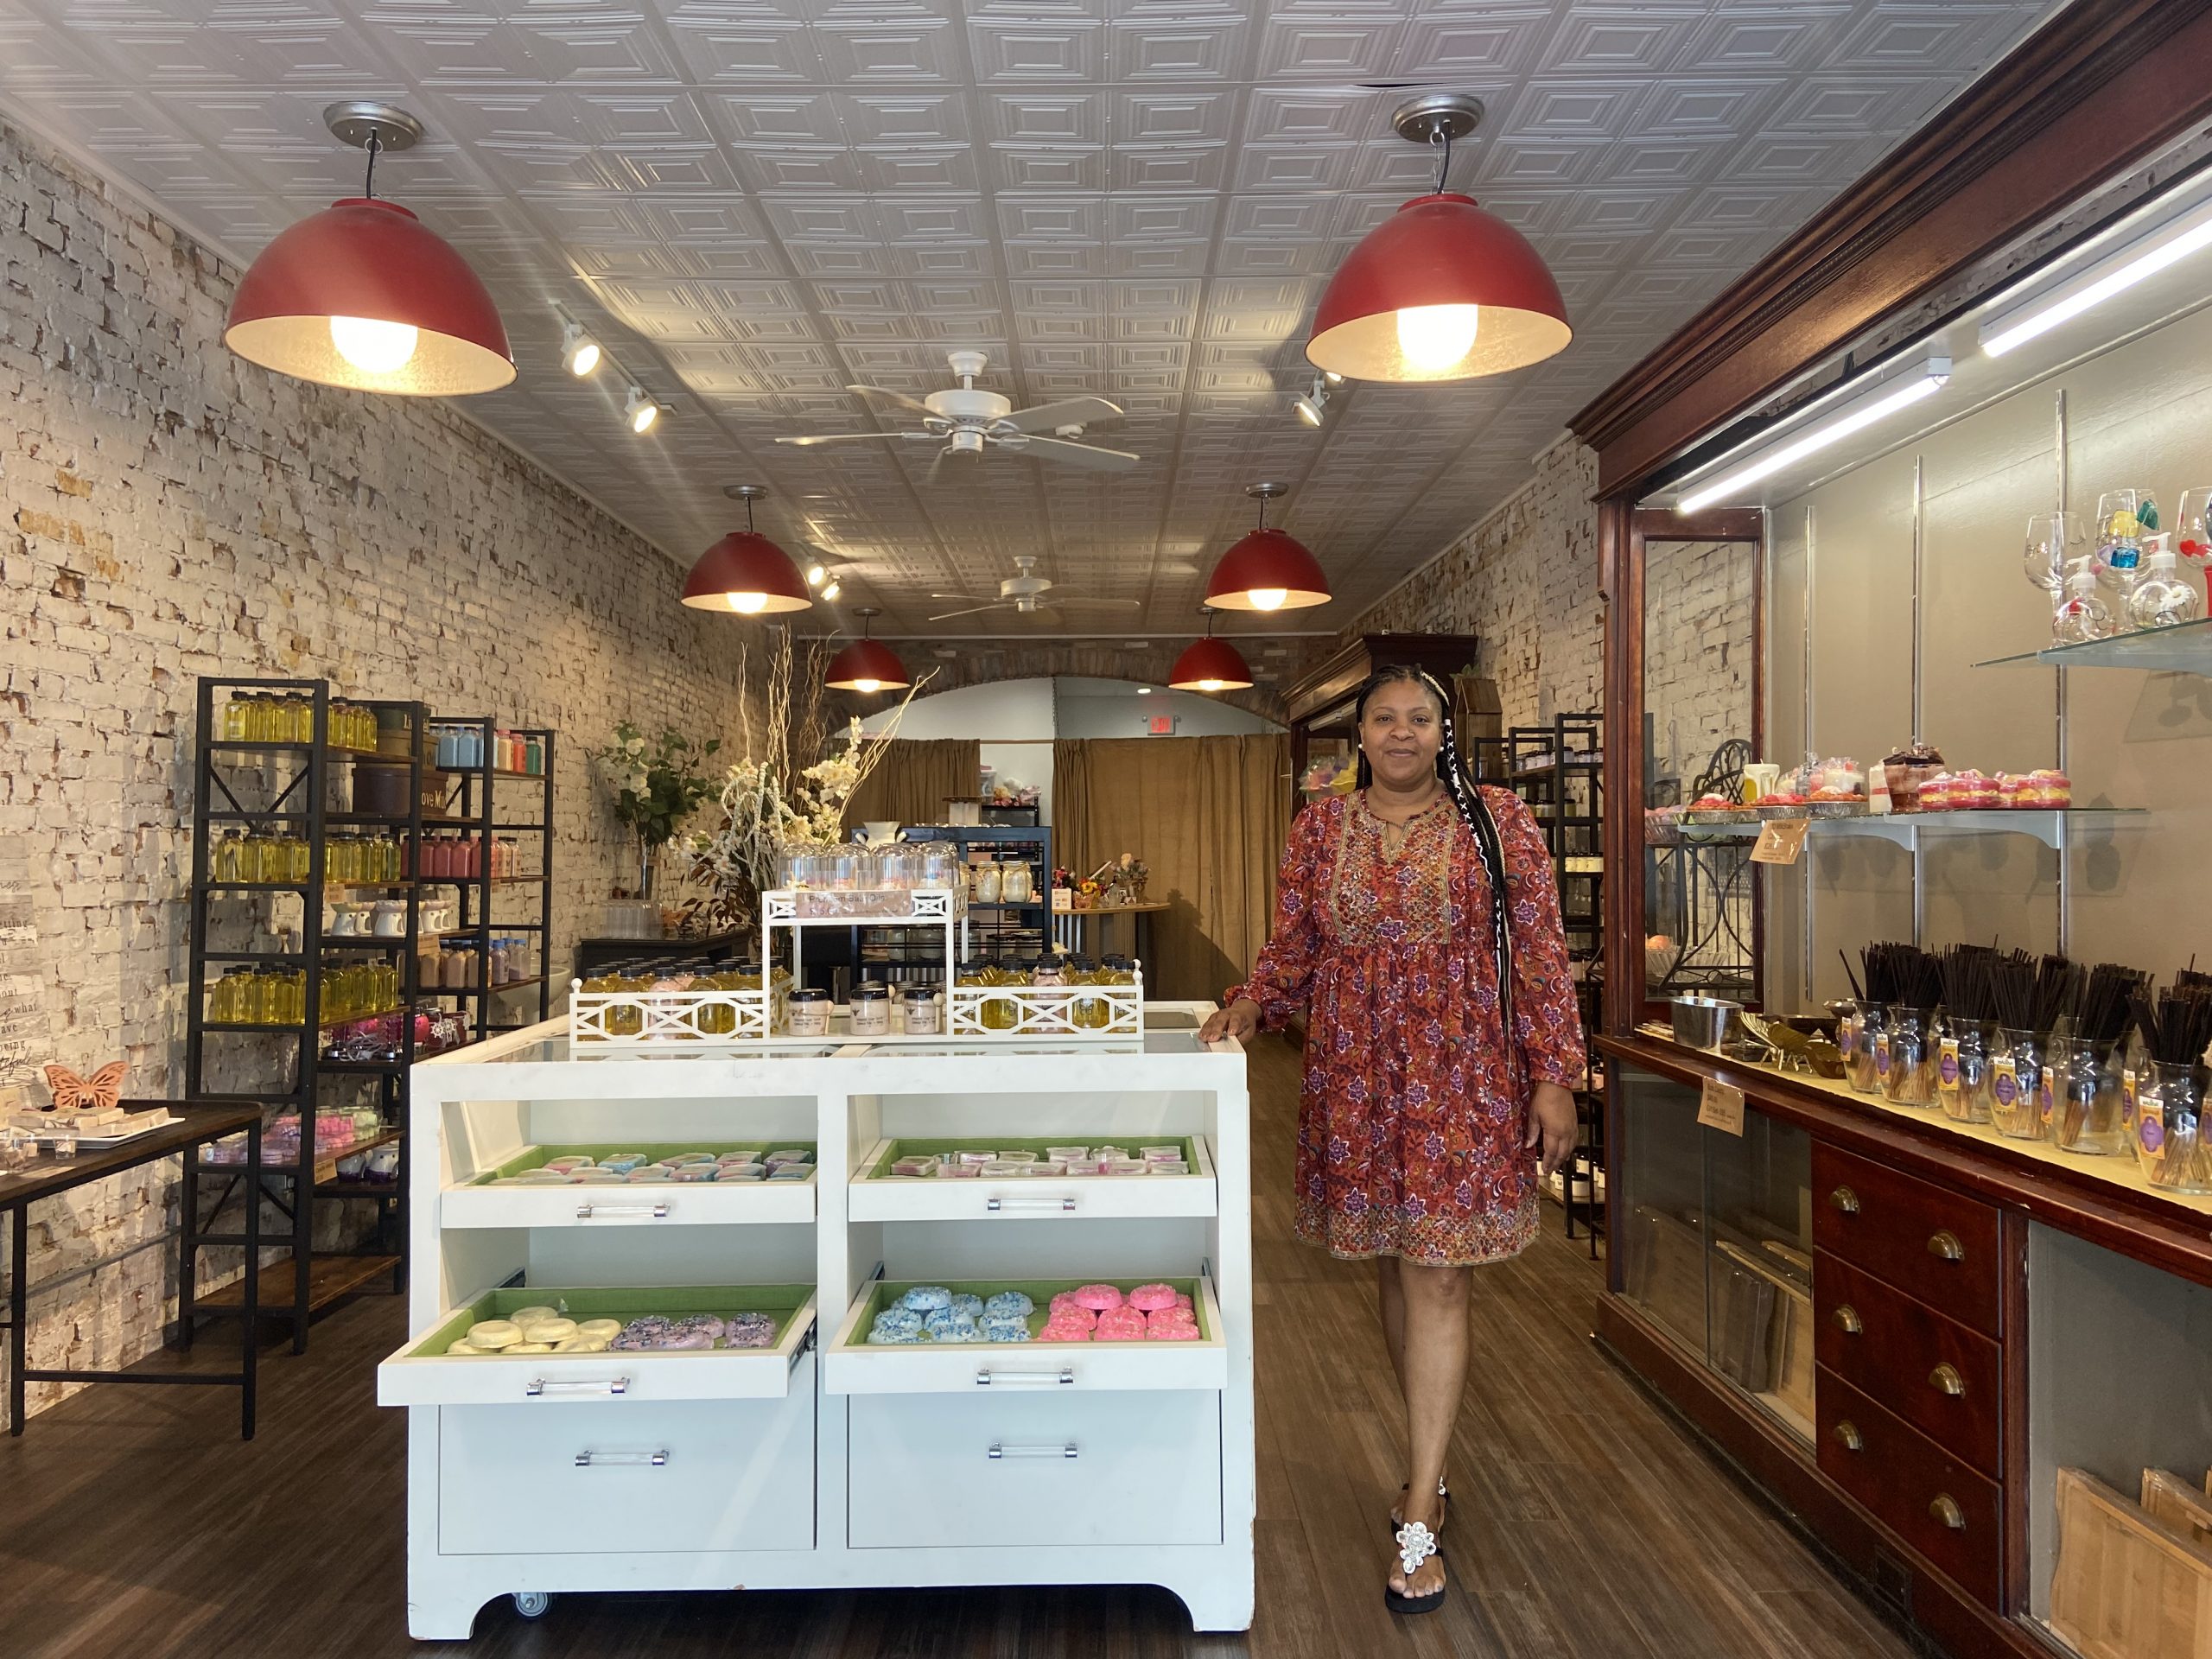 New shop brings scents, soaps to downtown Geneva